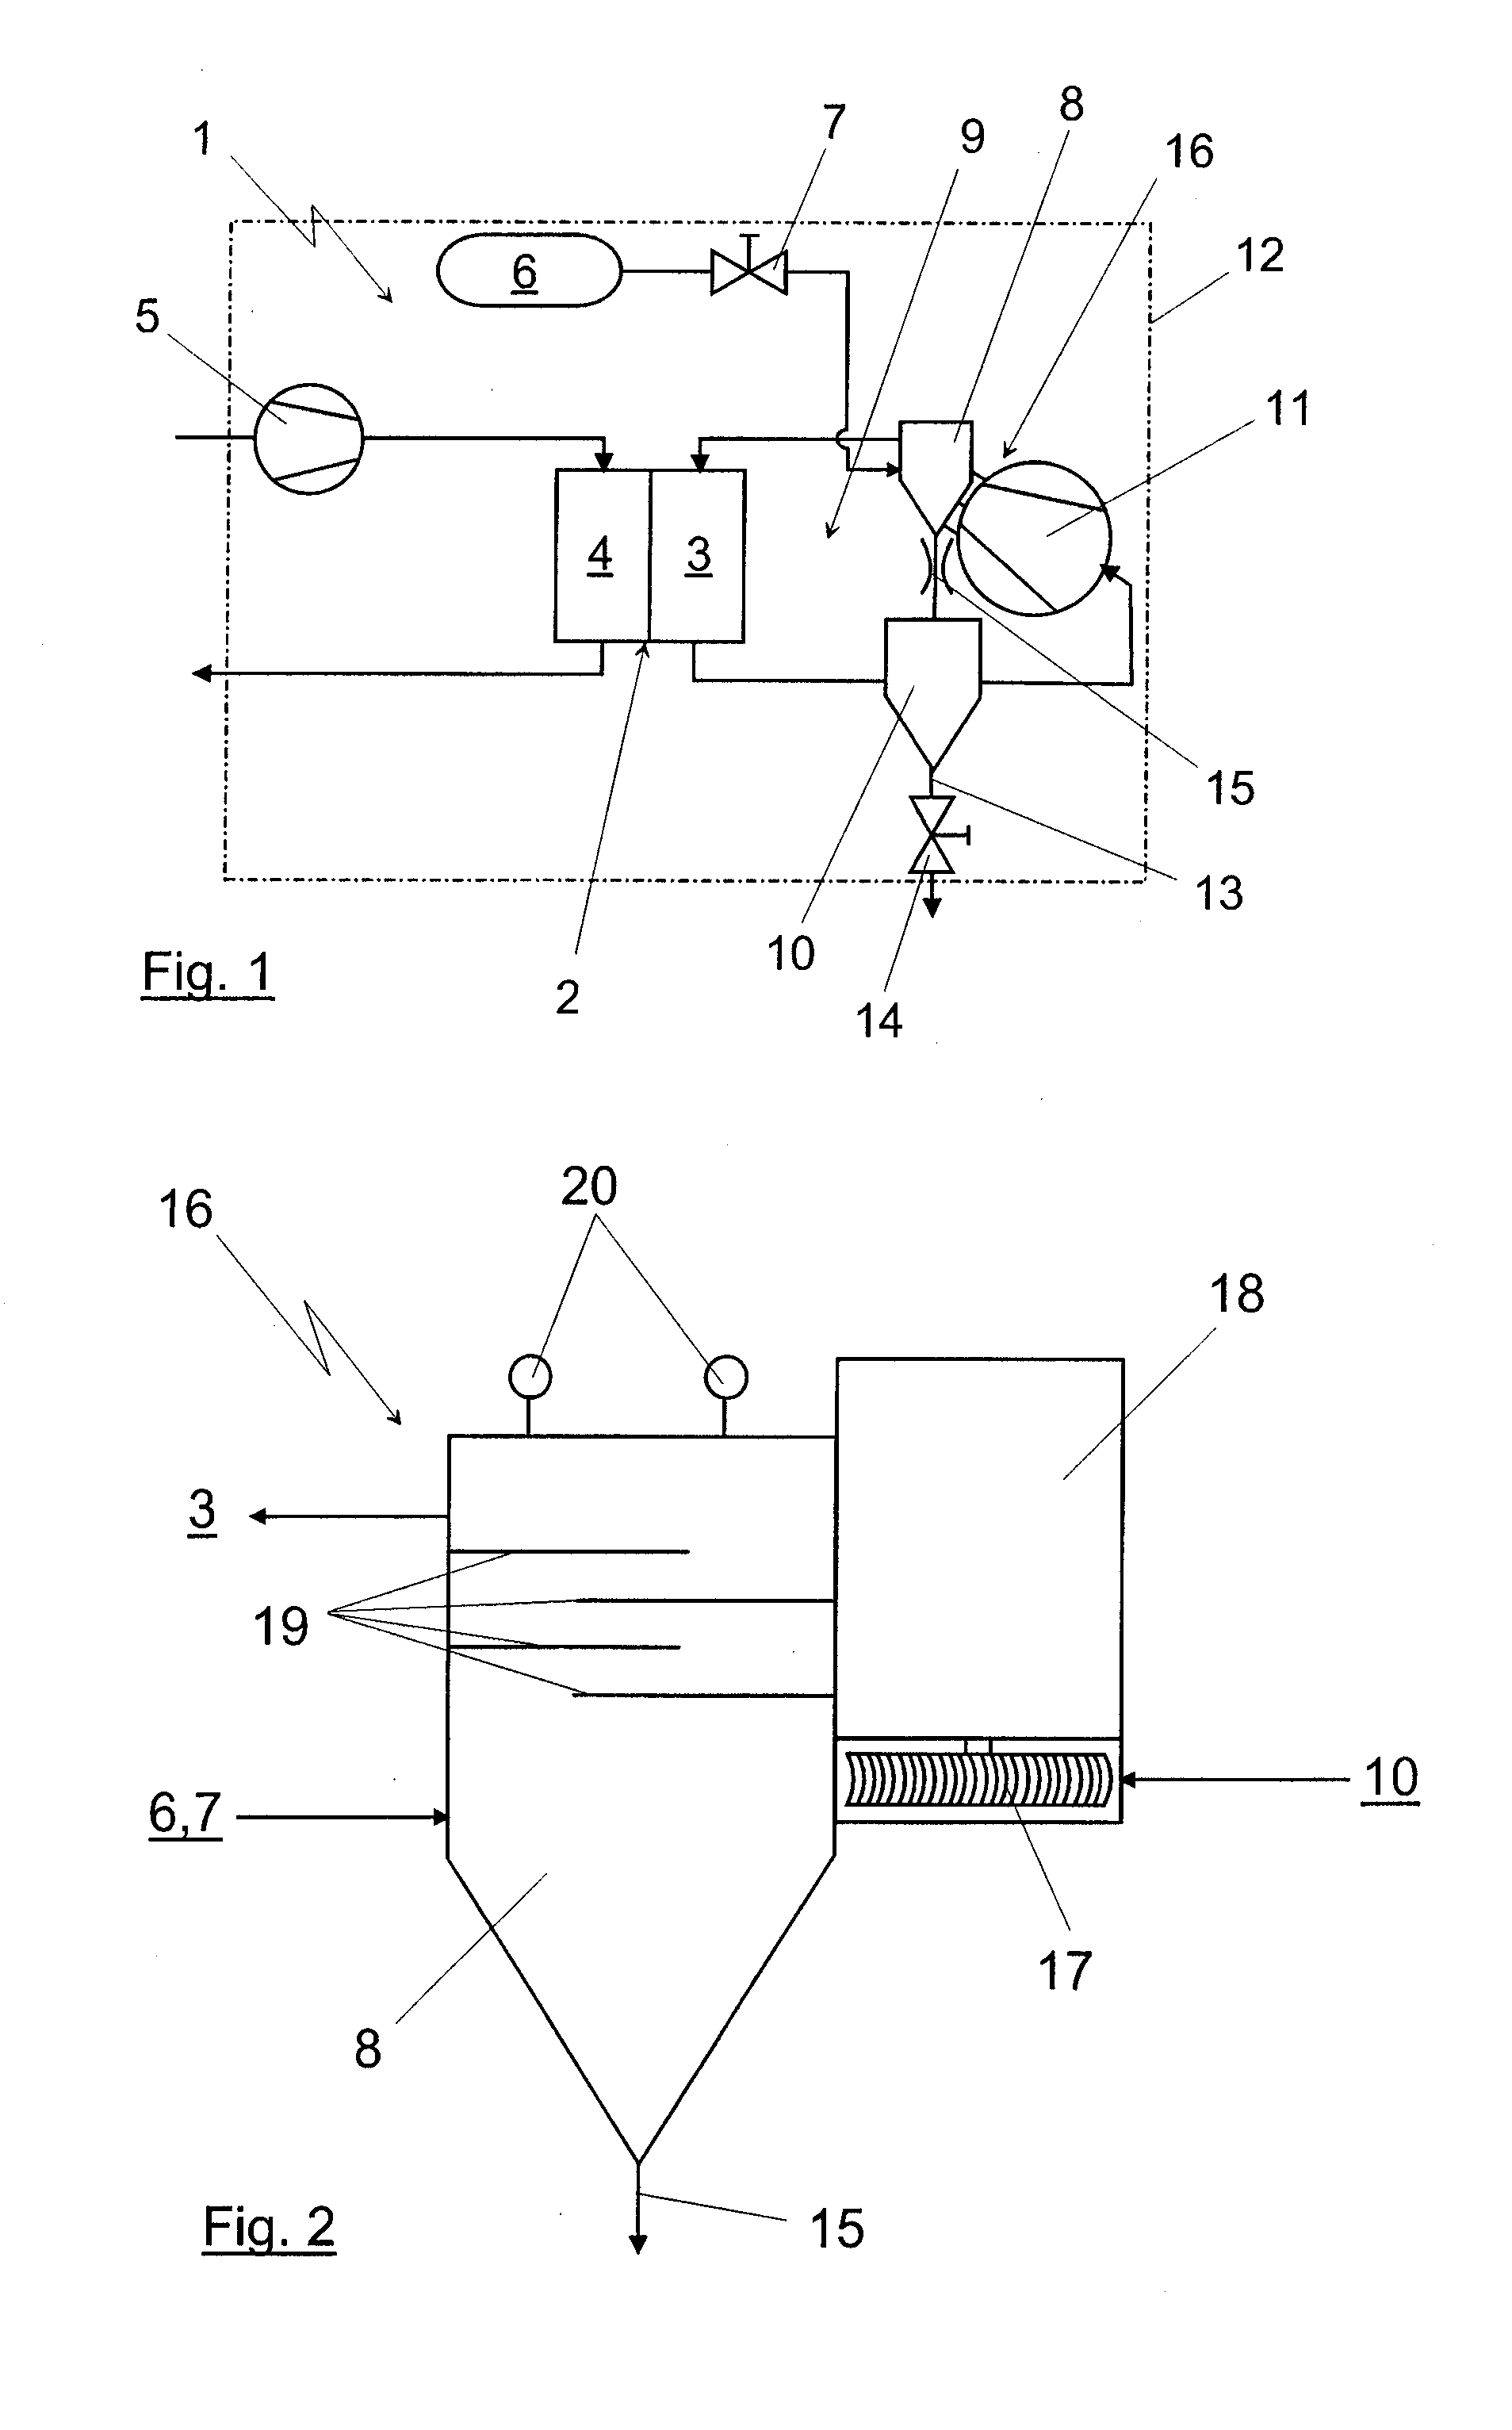 Fuel Cell System Having a Fluid Separator in the Anode Circuit